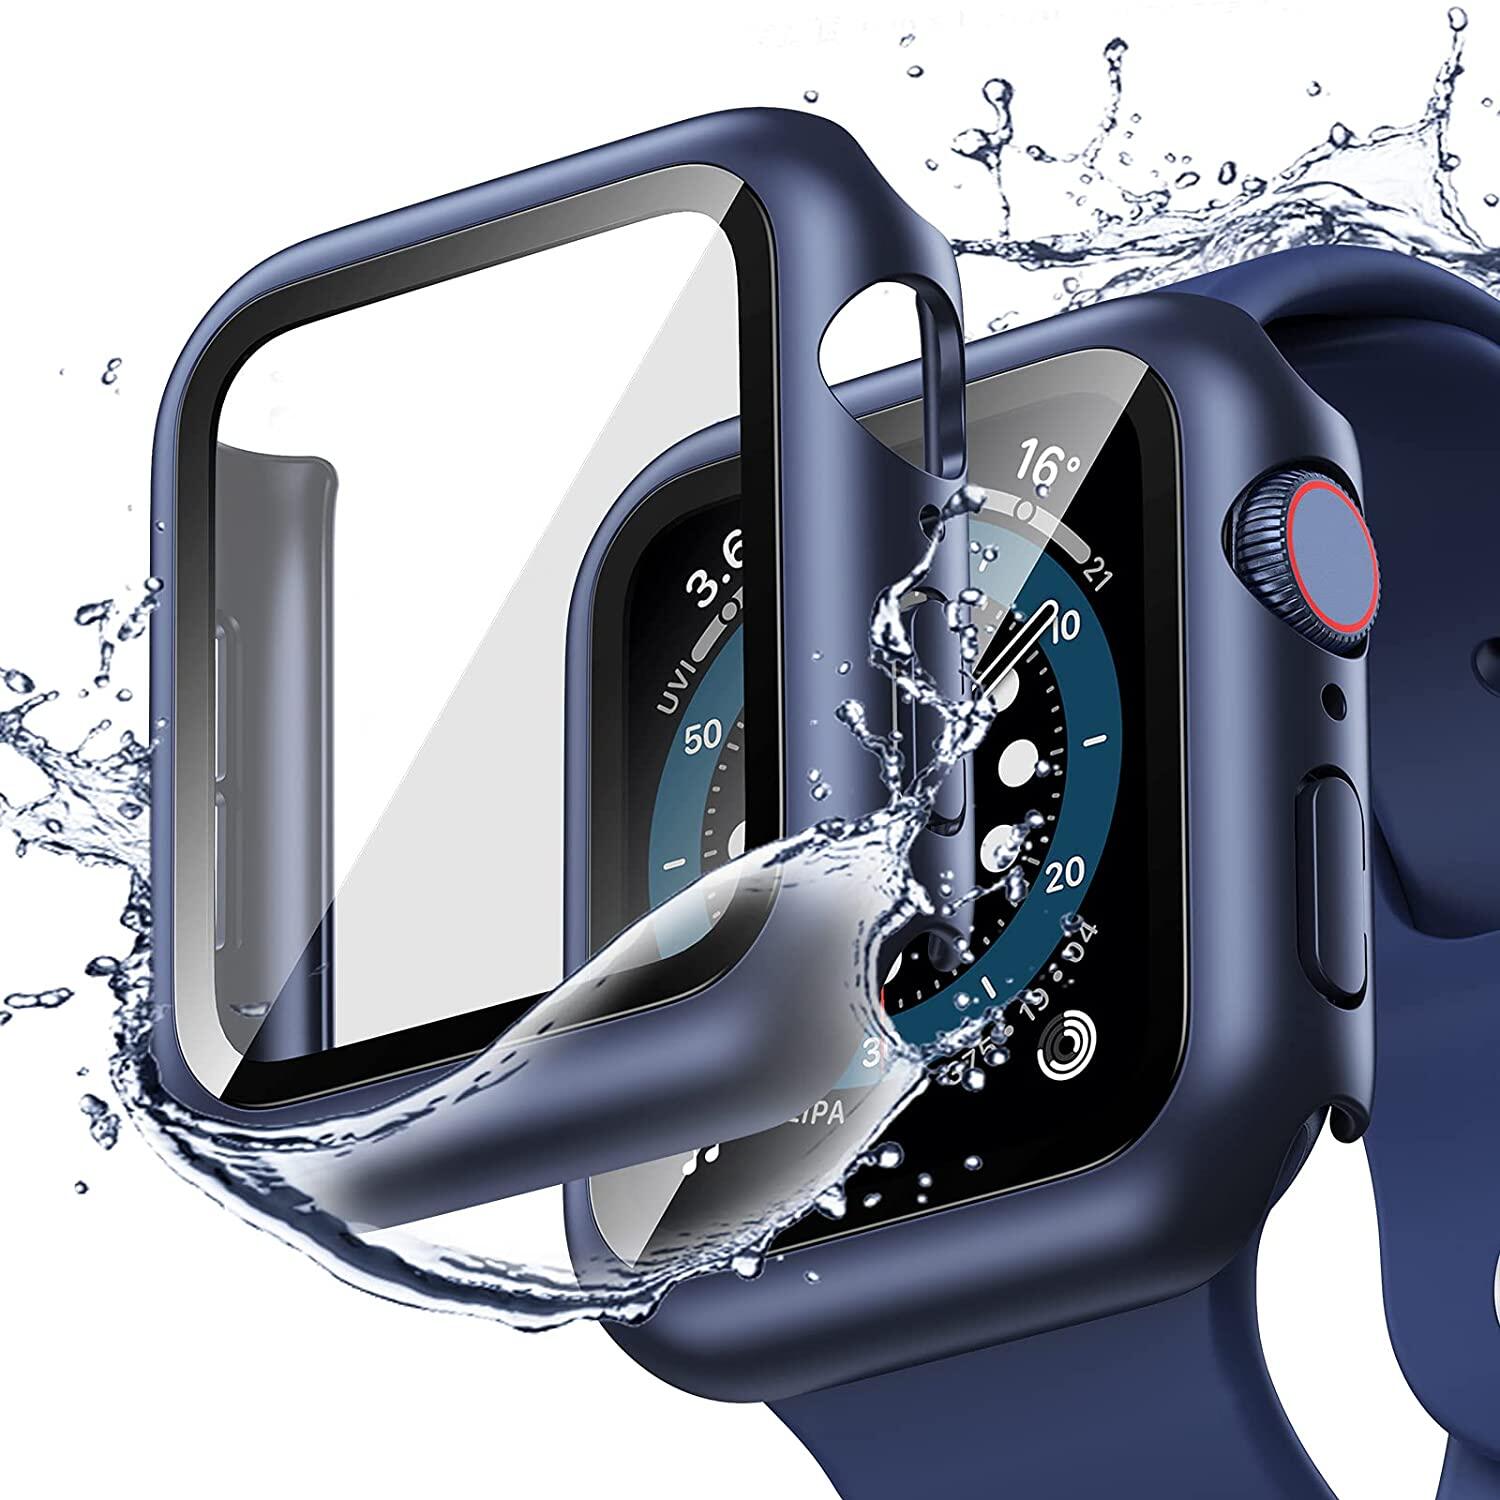 Watch Case Screen Protector for Iwatch  Case and Screen Protector for Apple Watch